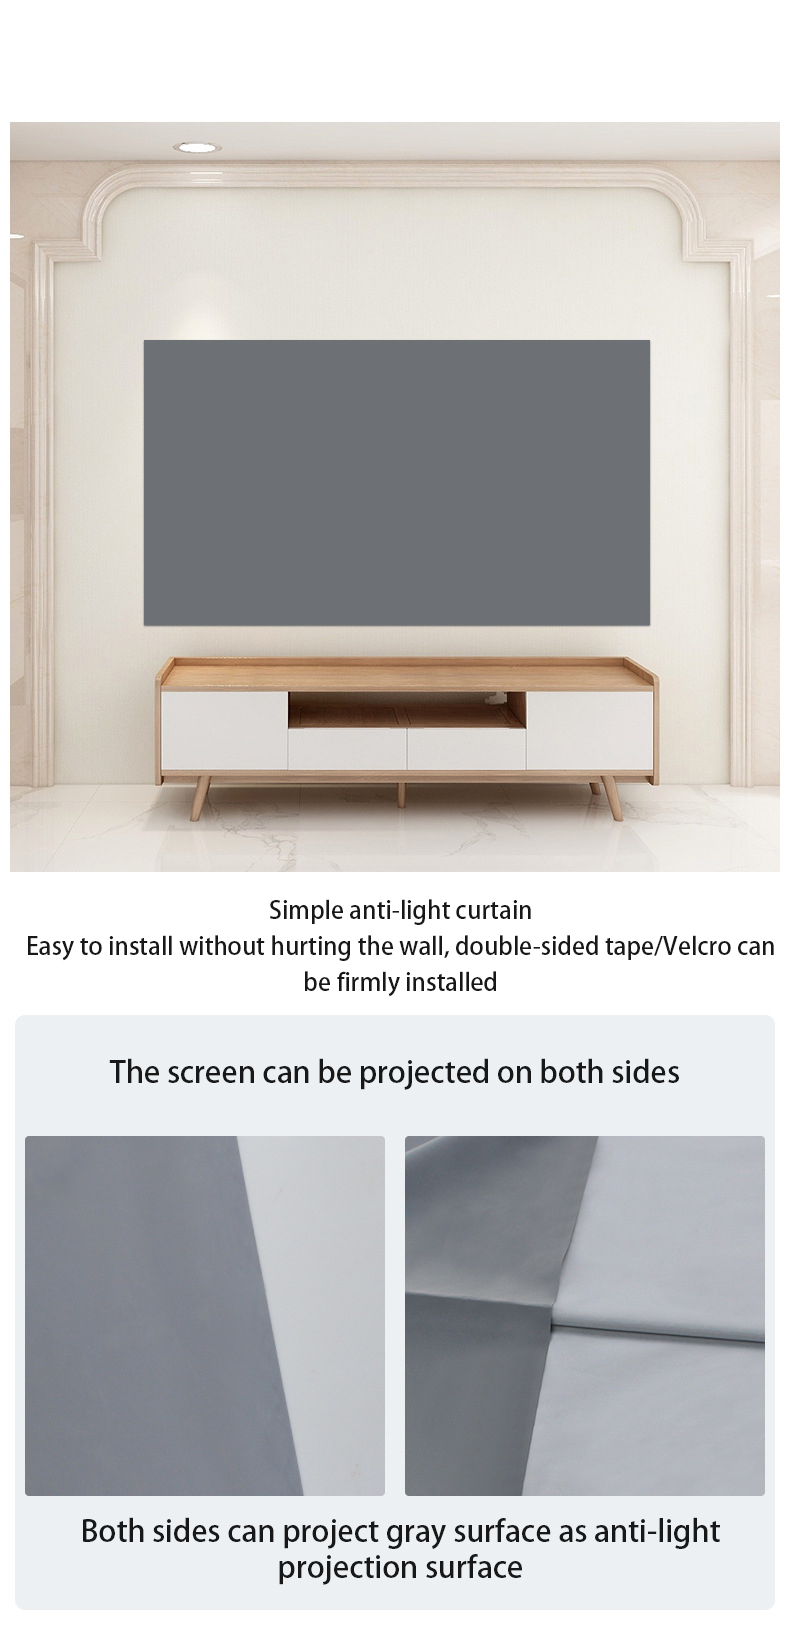 4K High-Definition Projector Screen 100-Inch 16:9 Metal Material Foldable Anti-light Curtain Simple Home Projector Portable Projector Screen